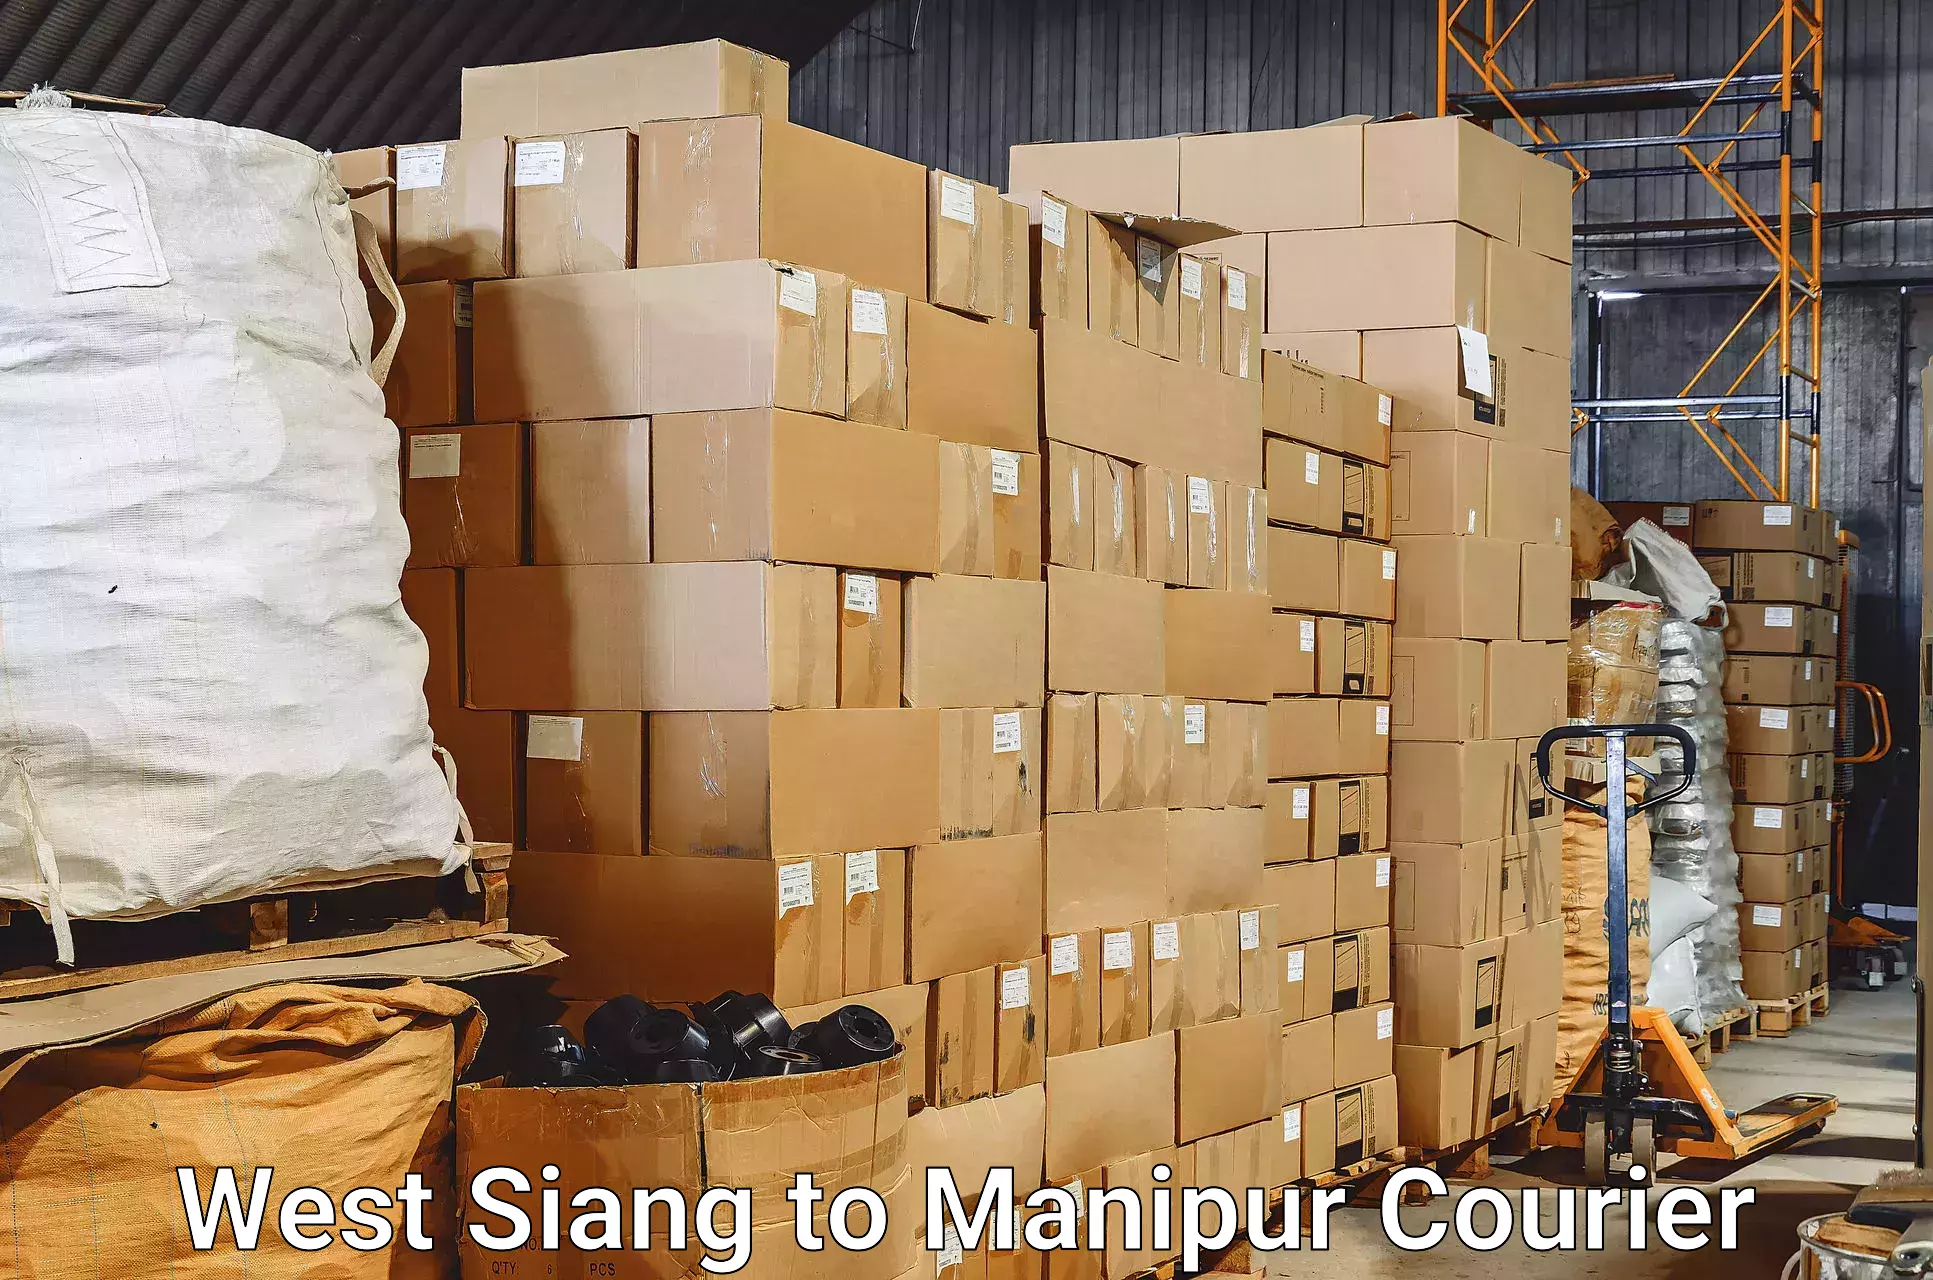 Hassle-free luggage shipping West Siang to Moirang